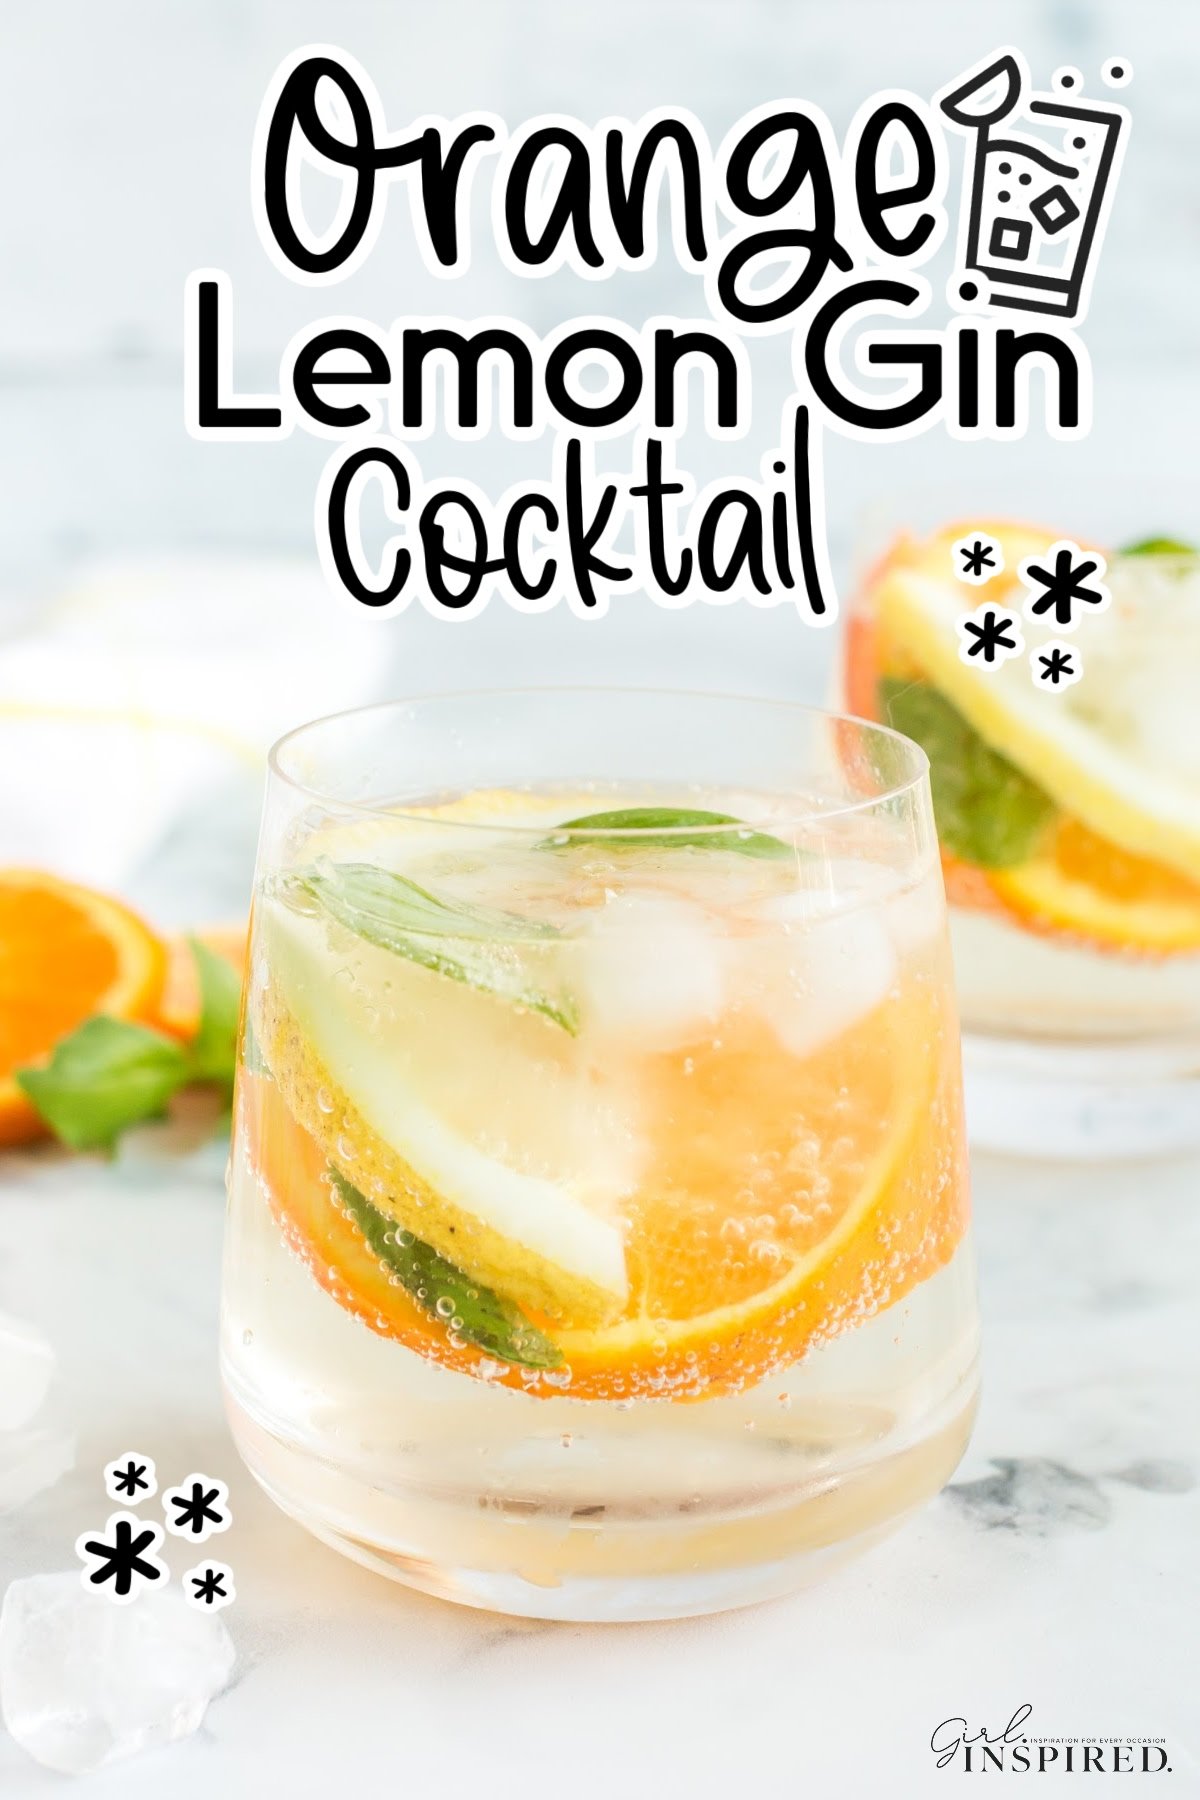 A glass of Orange Gin Cocktail with text overlay.